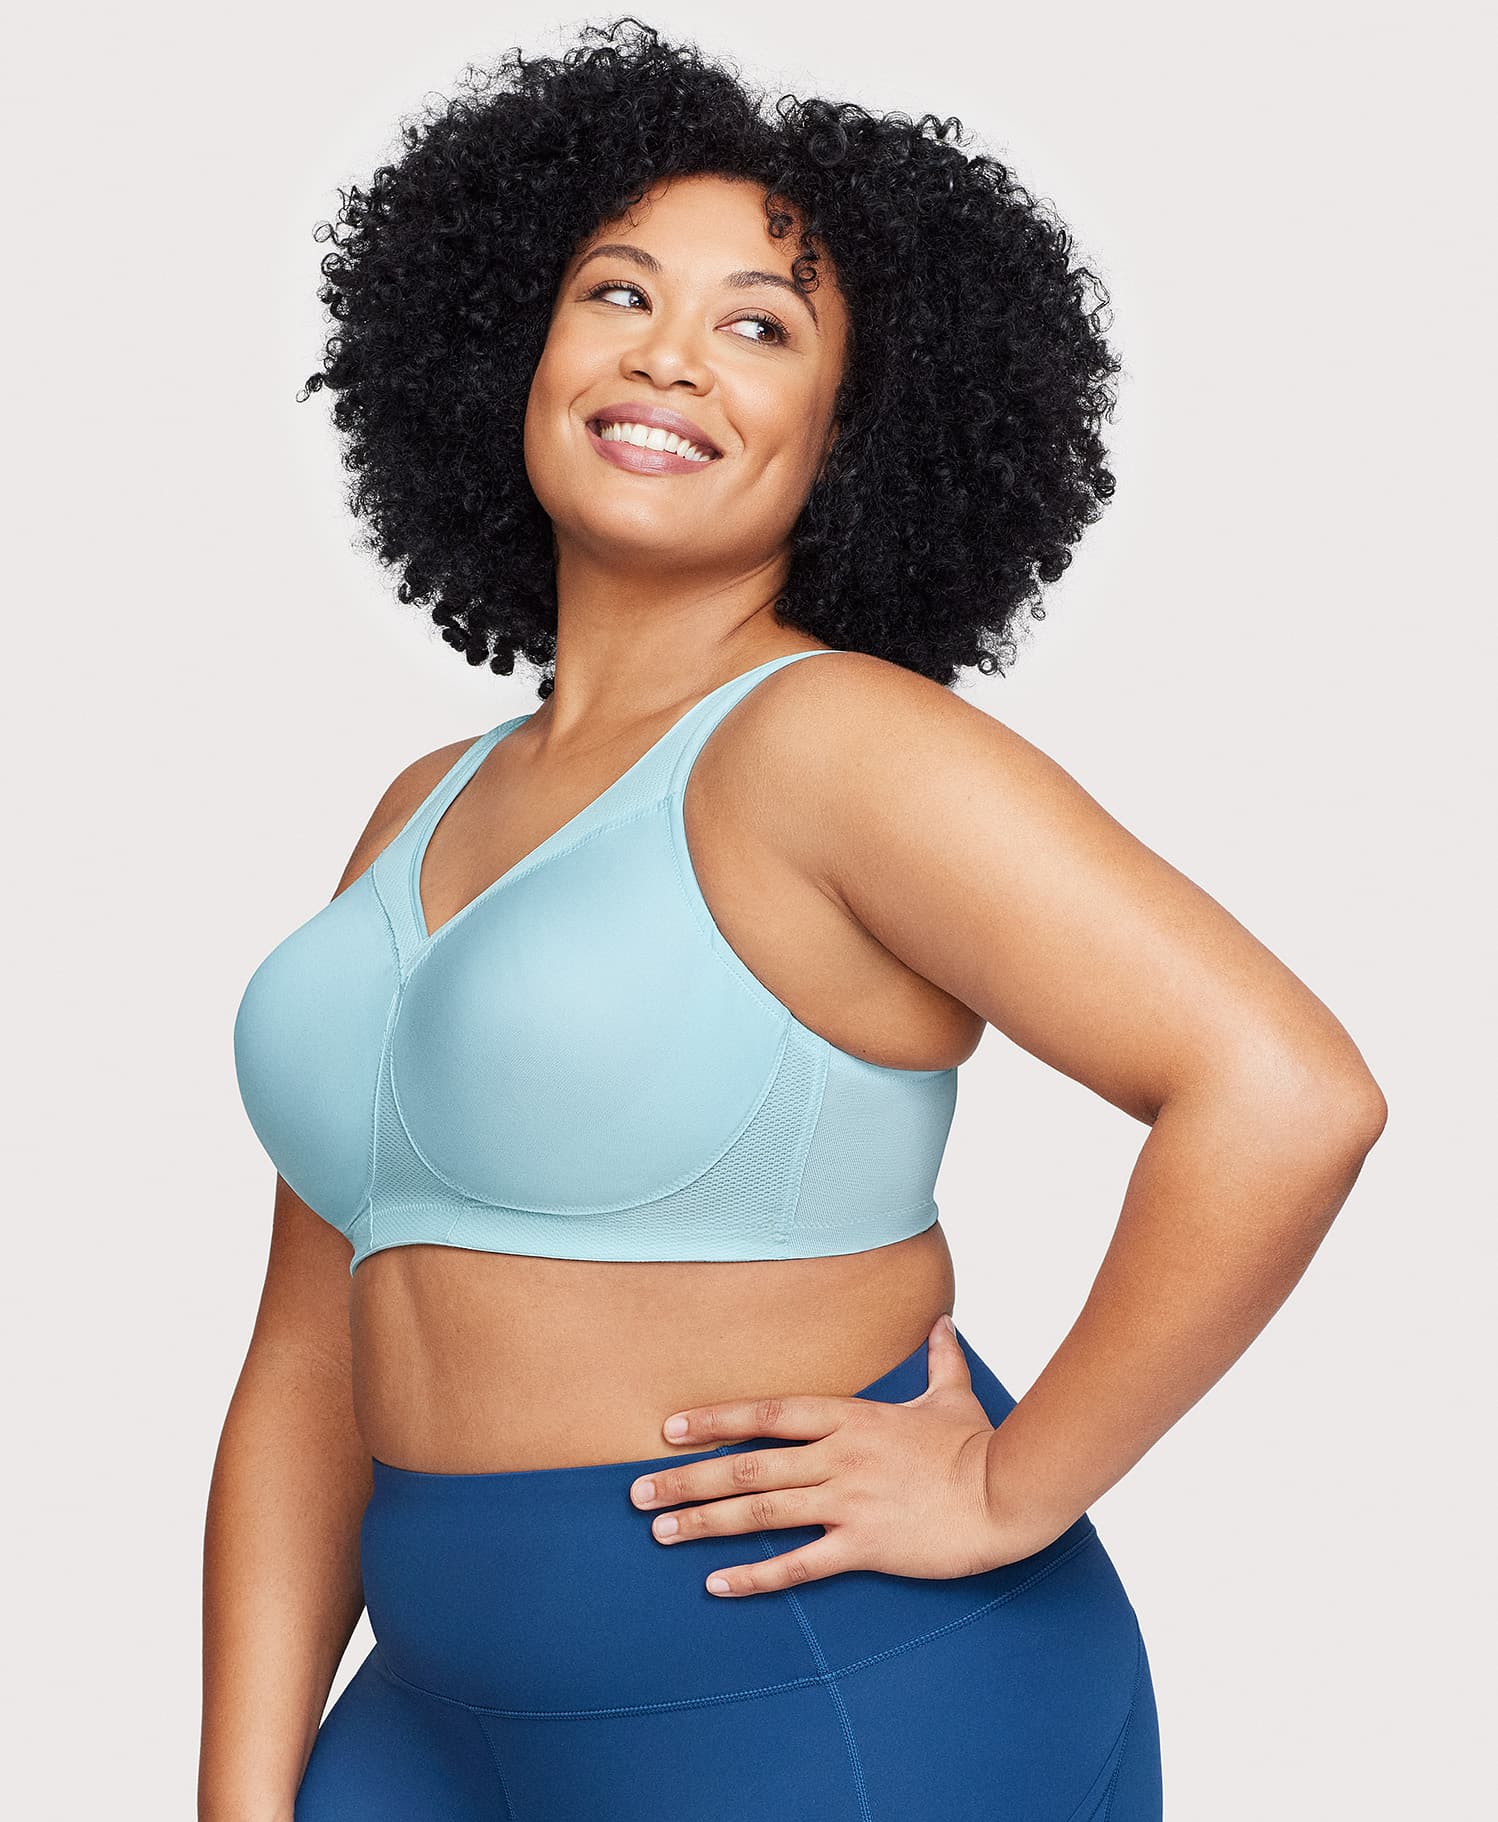 New Glamorise Women's Full Figure MagicLift Seamless Wirefree Sports Bra in  Cafe, Sz 36I, also fits 42DDD, 44DD, 46D! Retails $60+